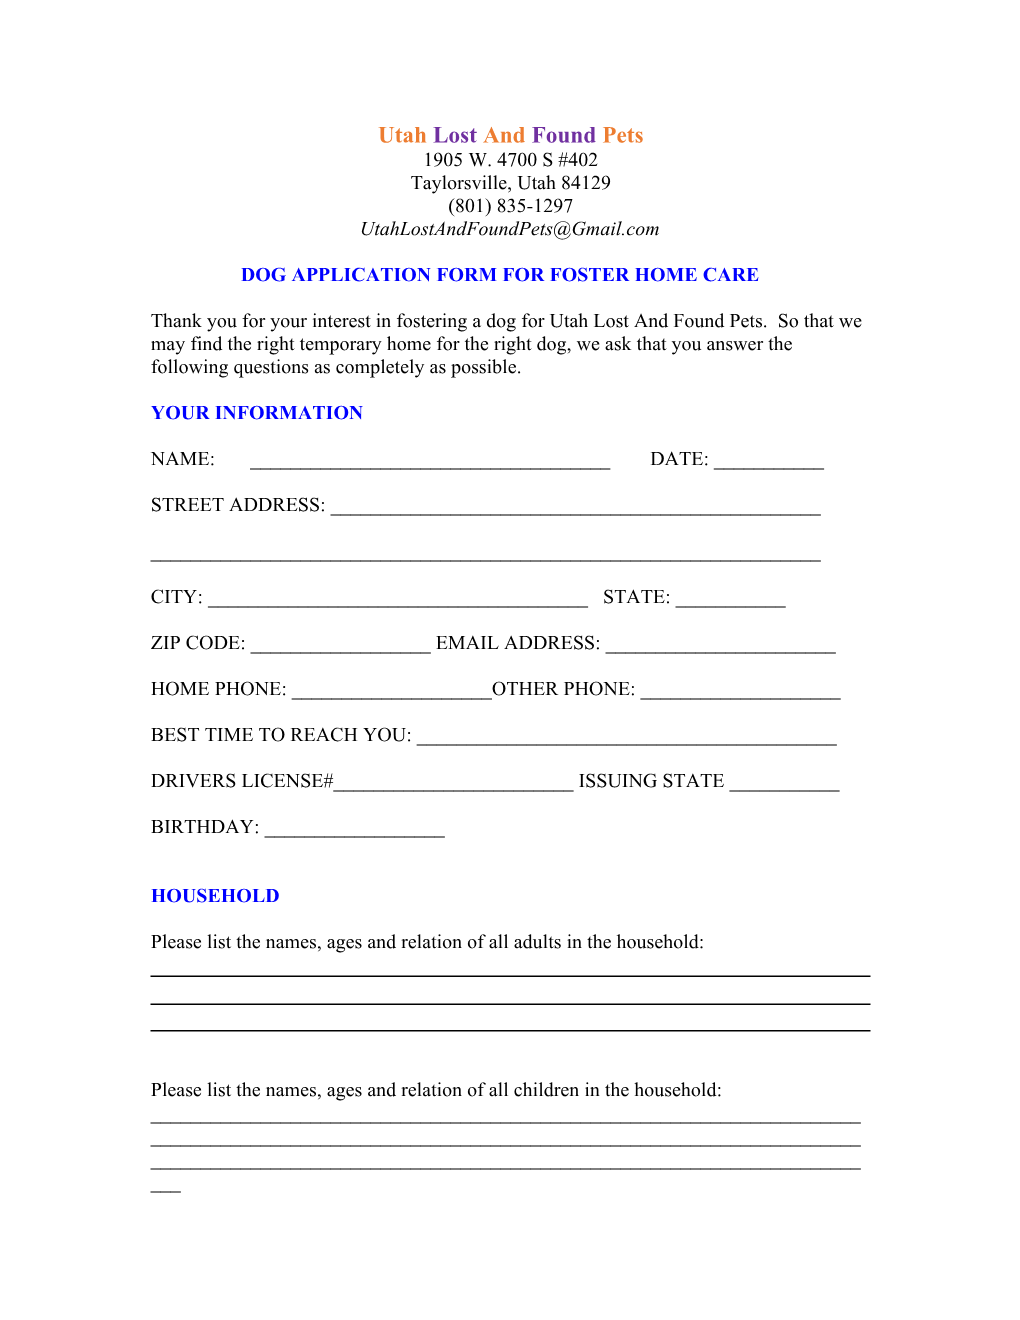 Application Form for Foster Home Care